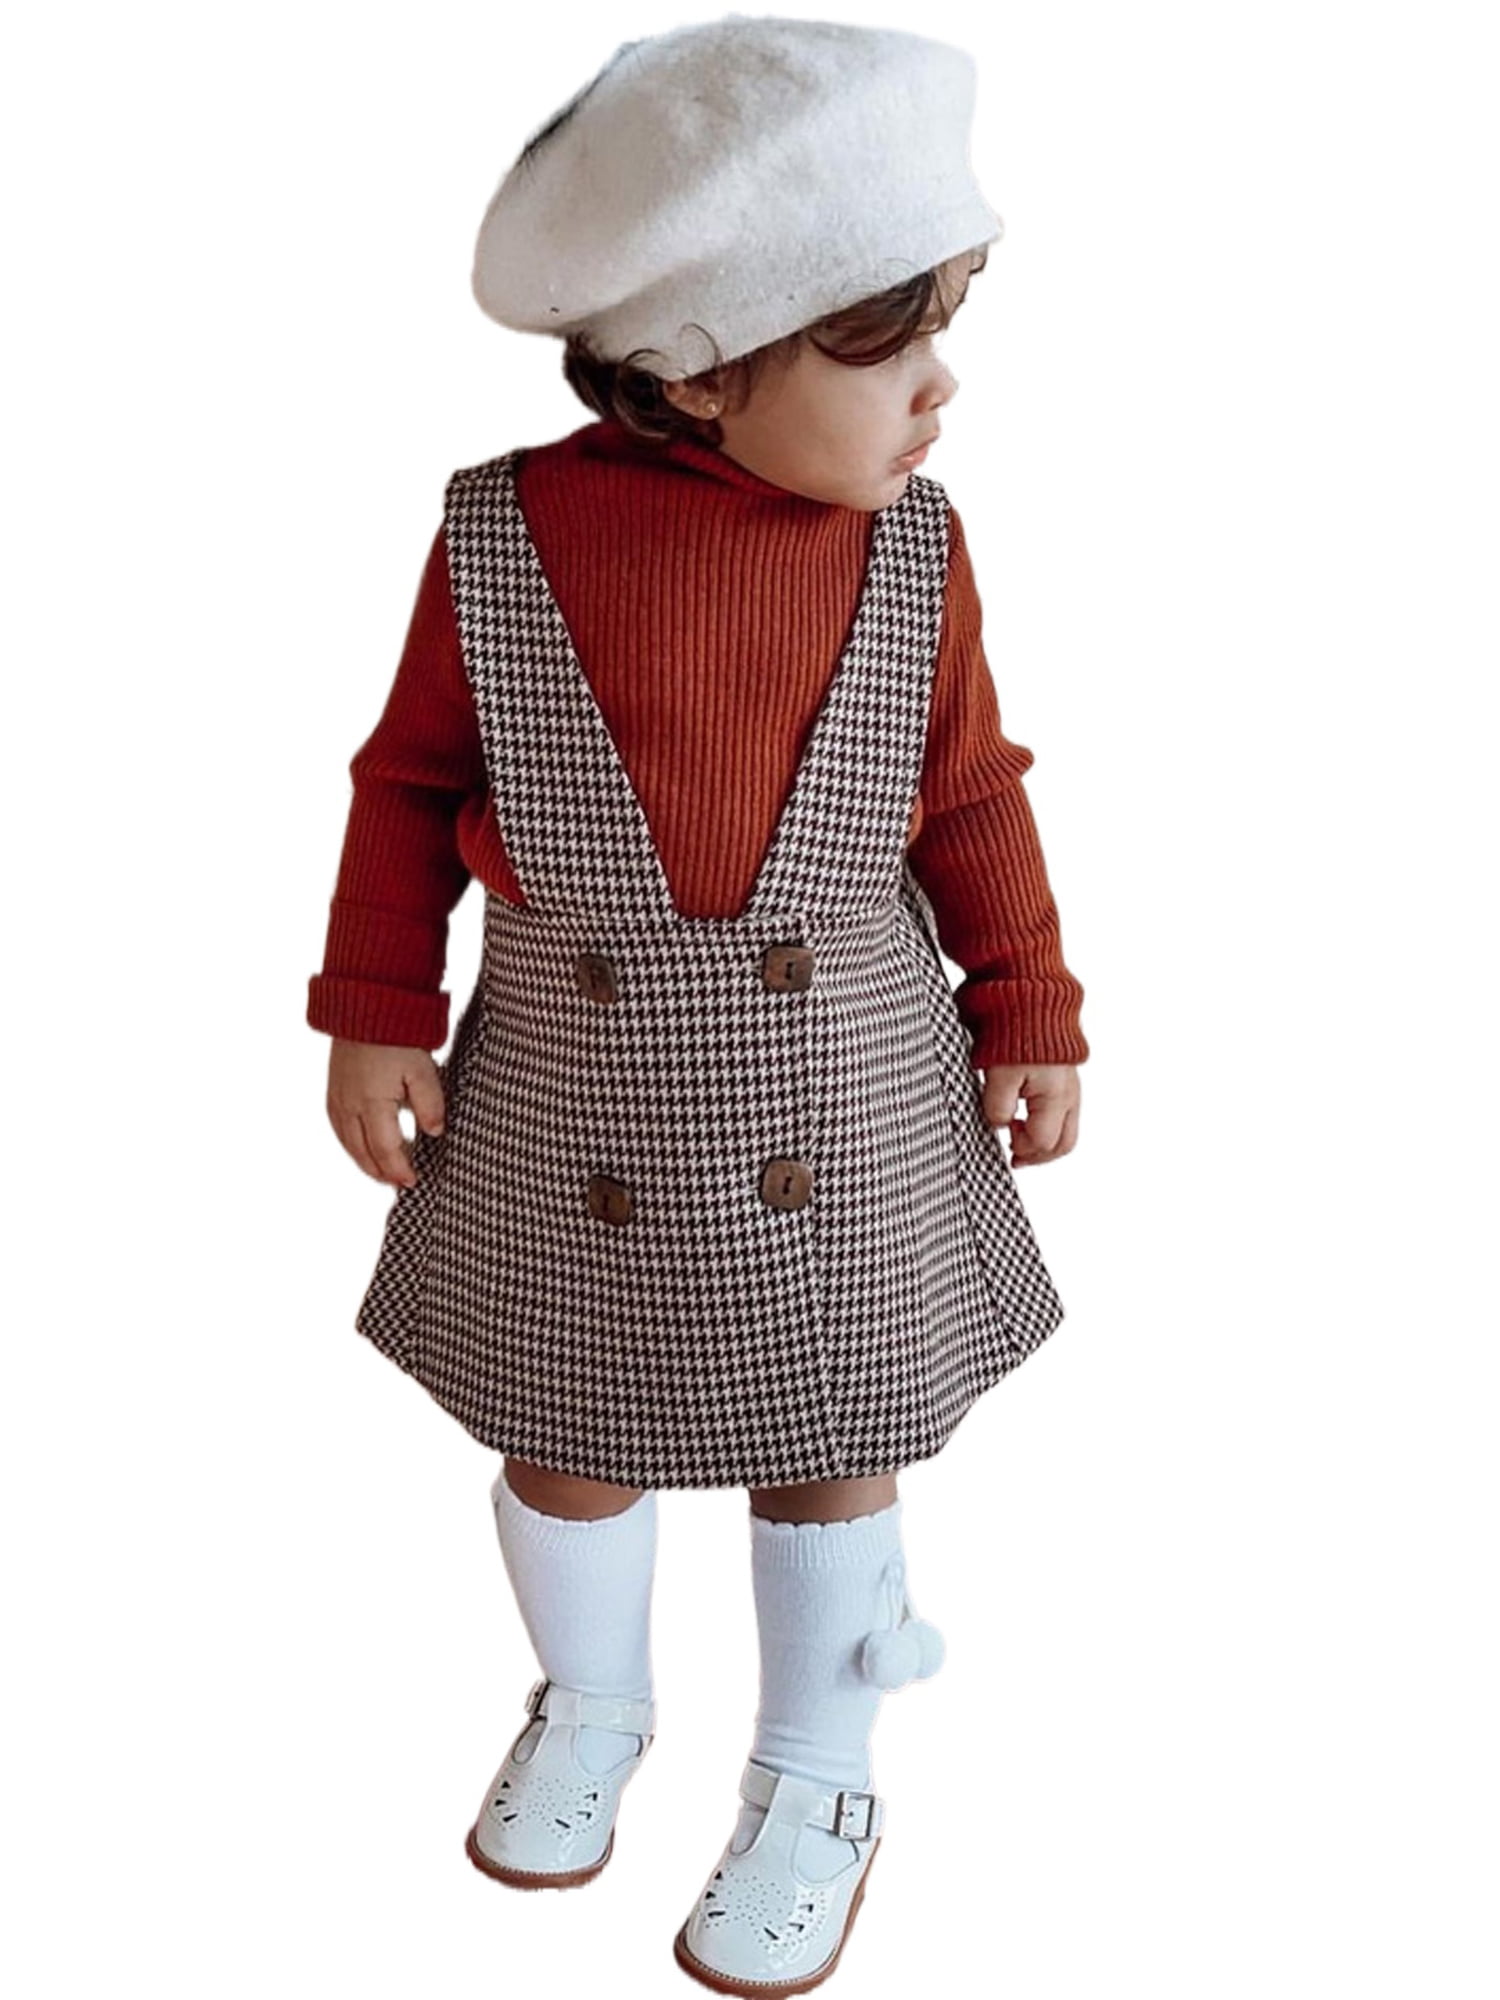 Toddler Girl Clothes Skirt Sets Long Sleeve Sweater Top and Suspender Plaid Skirts Fall Winter Clothes Set 